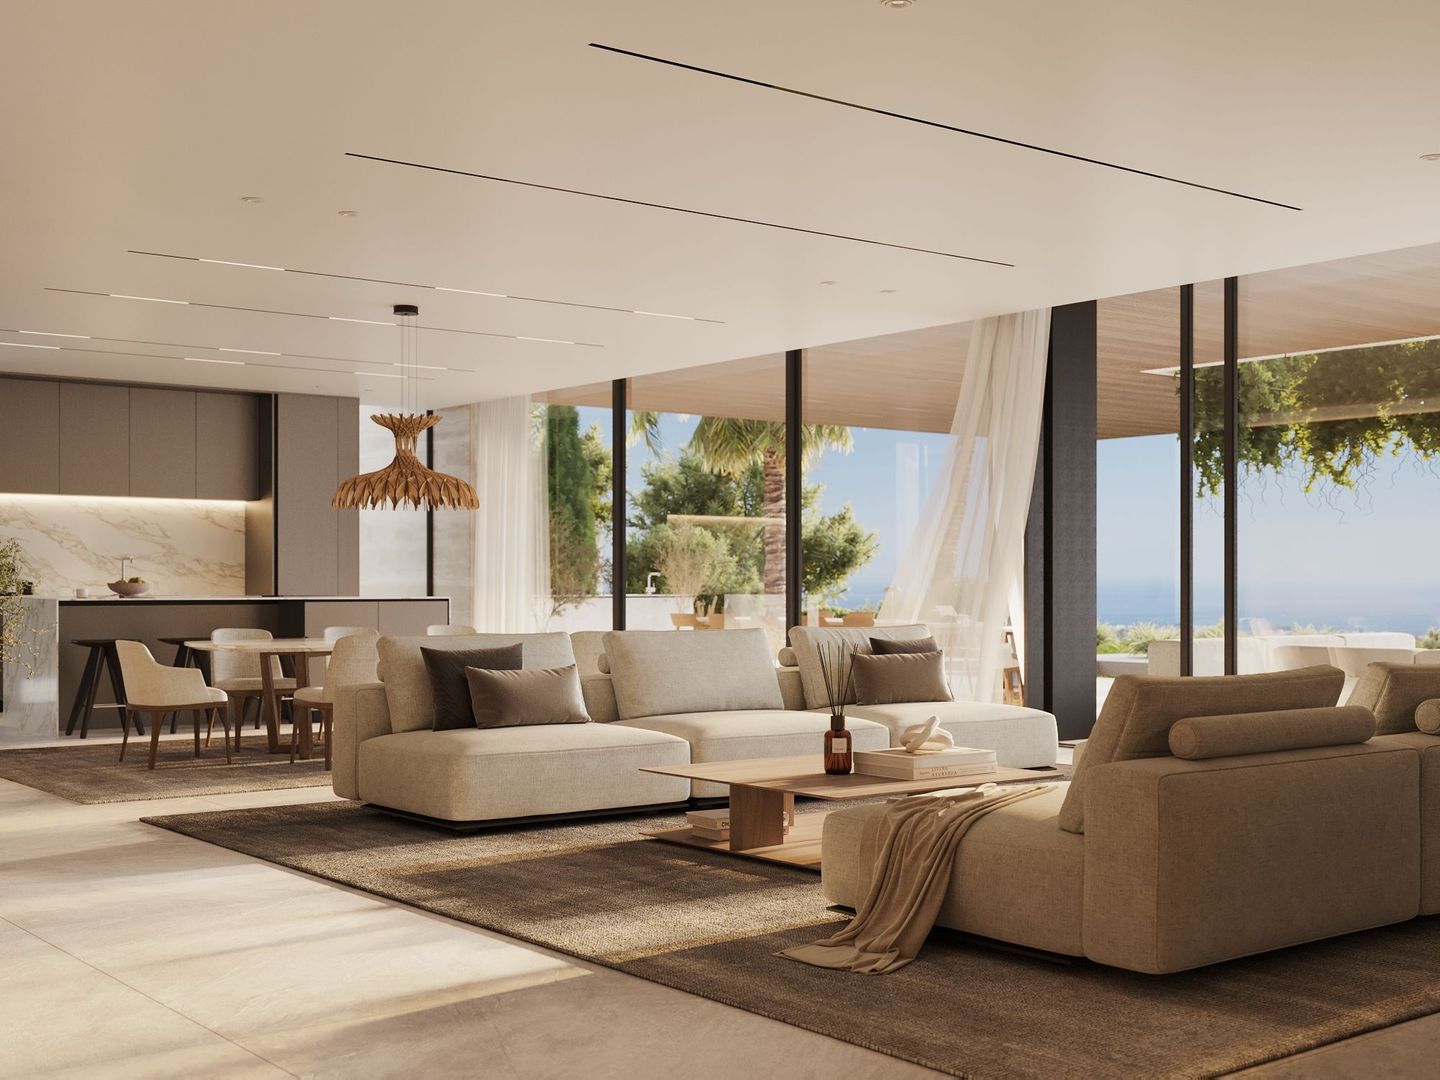 One of the most exciting property launches in Marbella, Benahavis foto-7